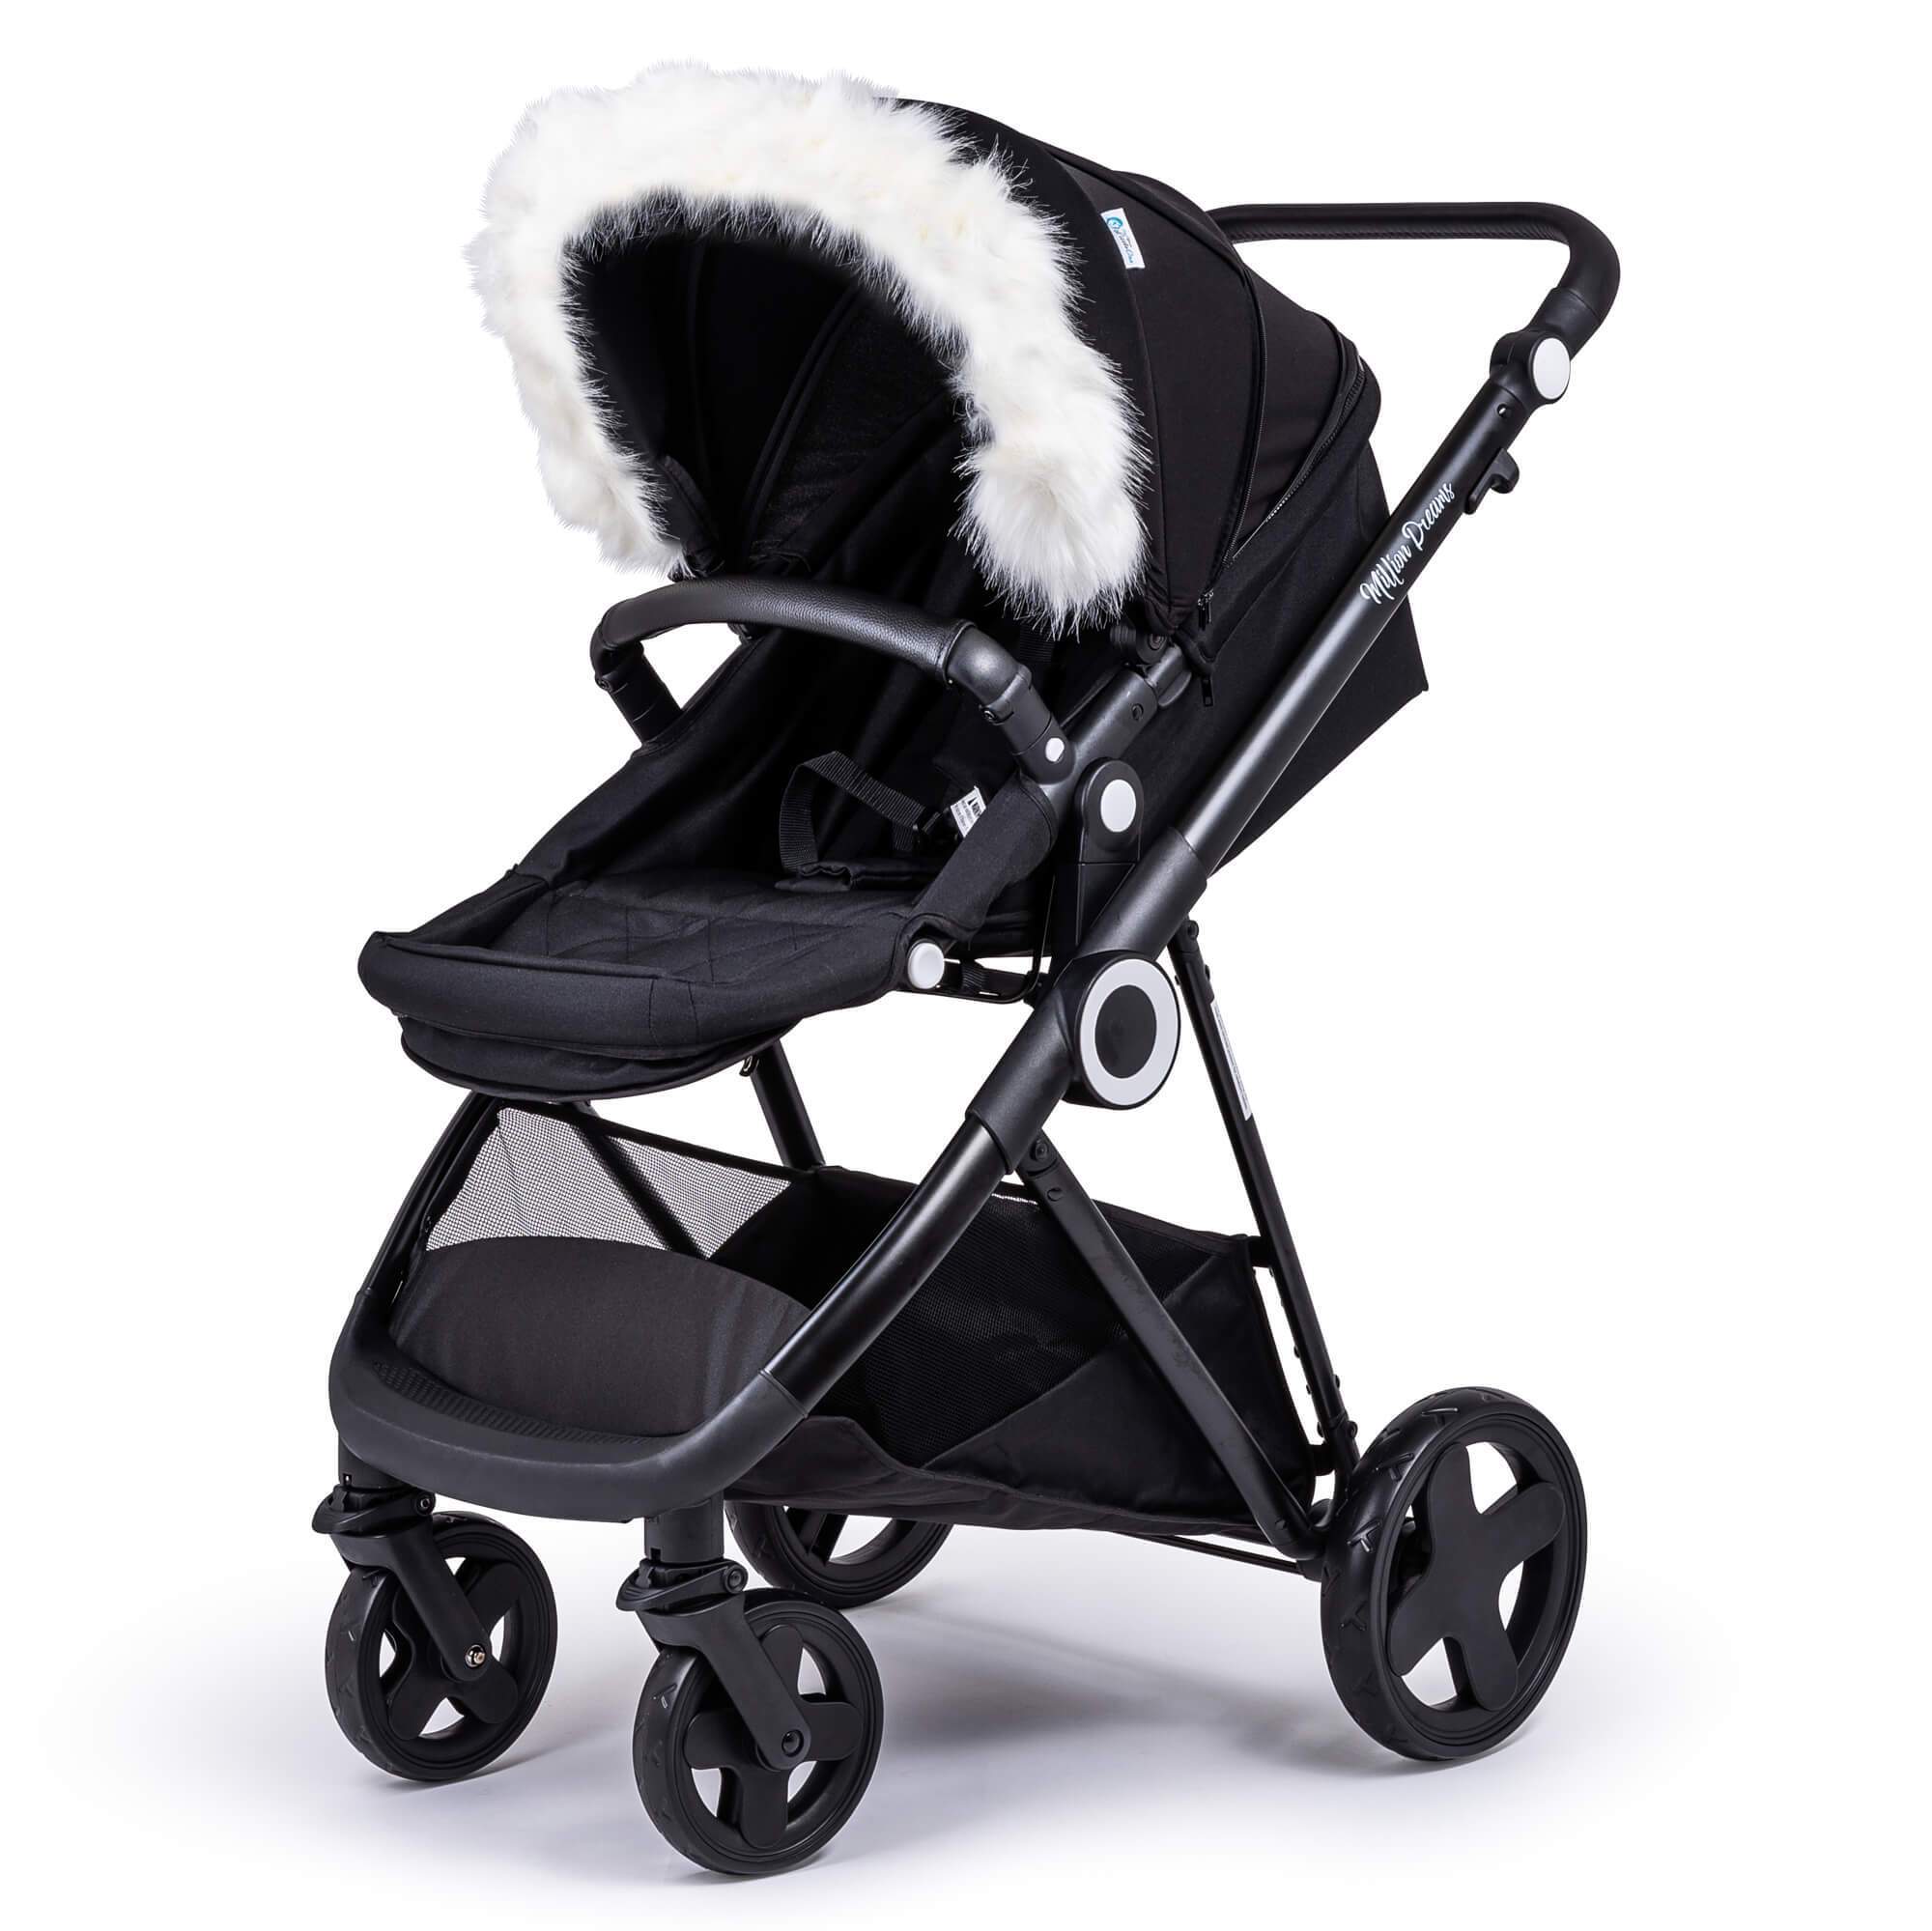 Pram Fur Hood Trim Attachment For Pushchair Compatible with Baby Elegance - White / Fits All Models | For Your Little One